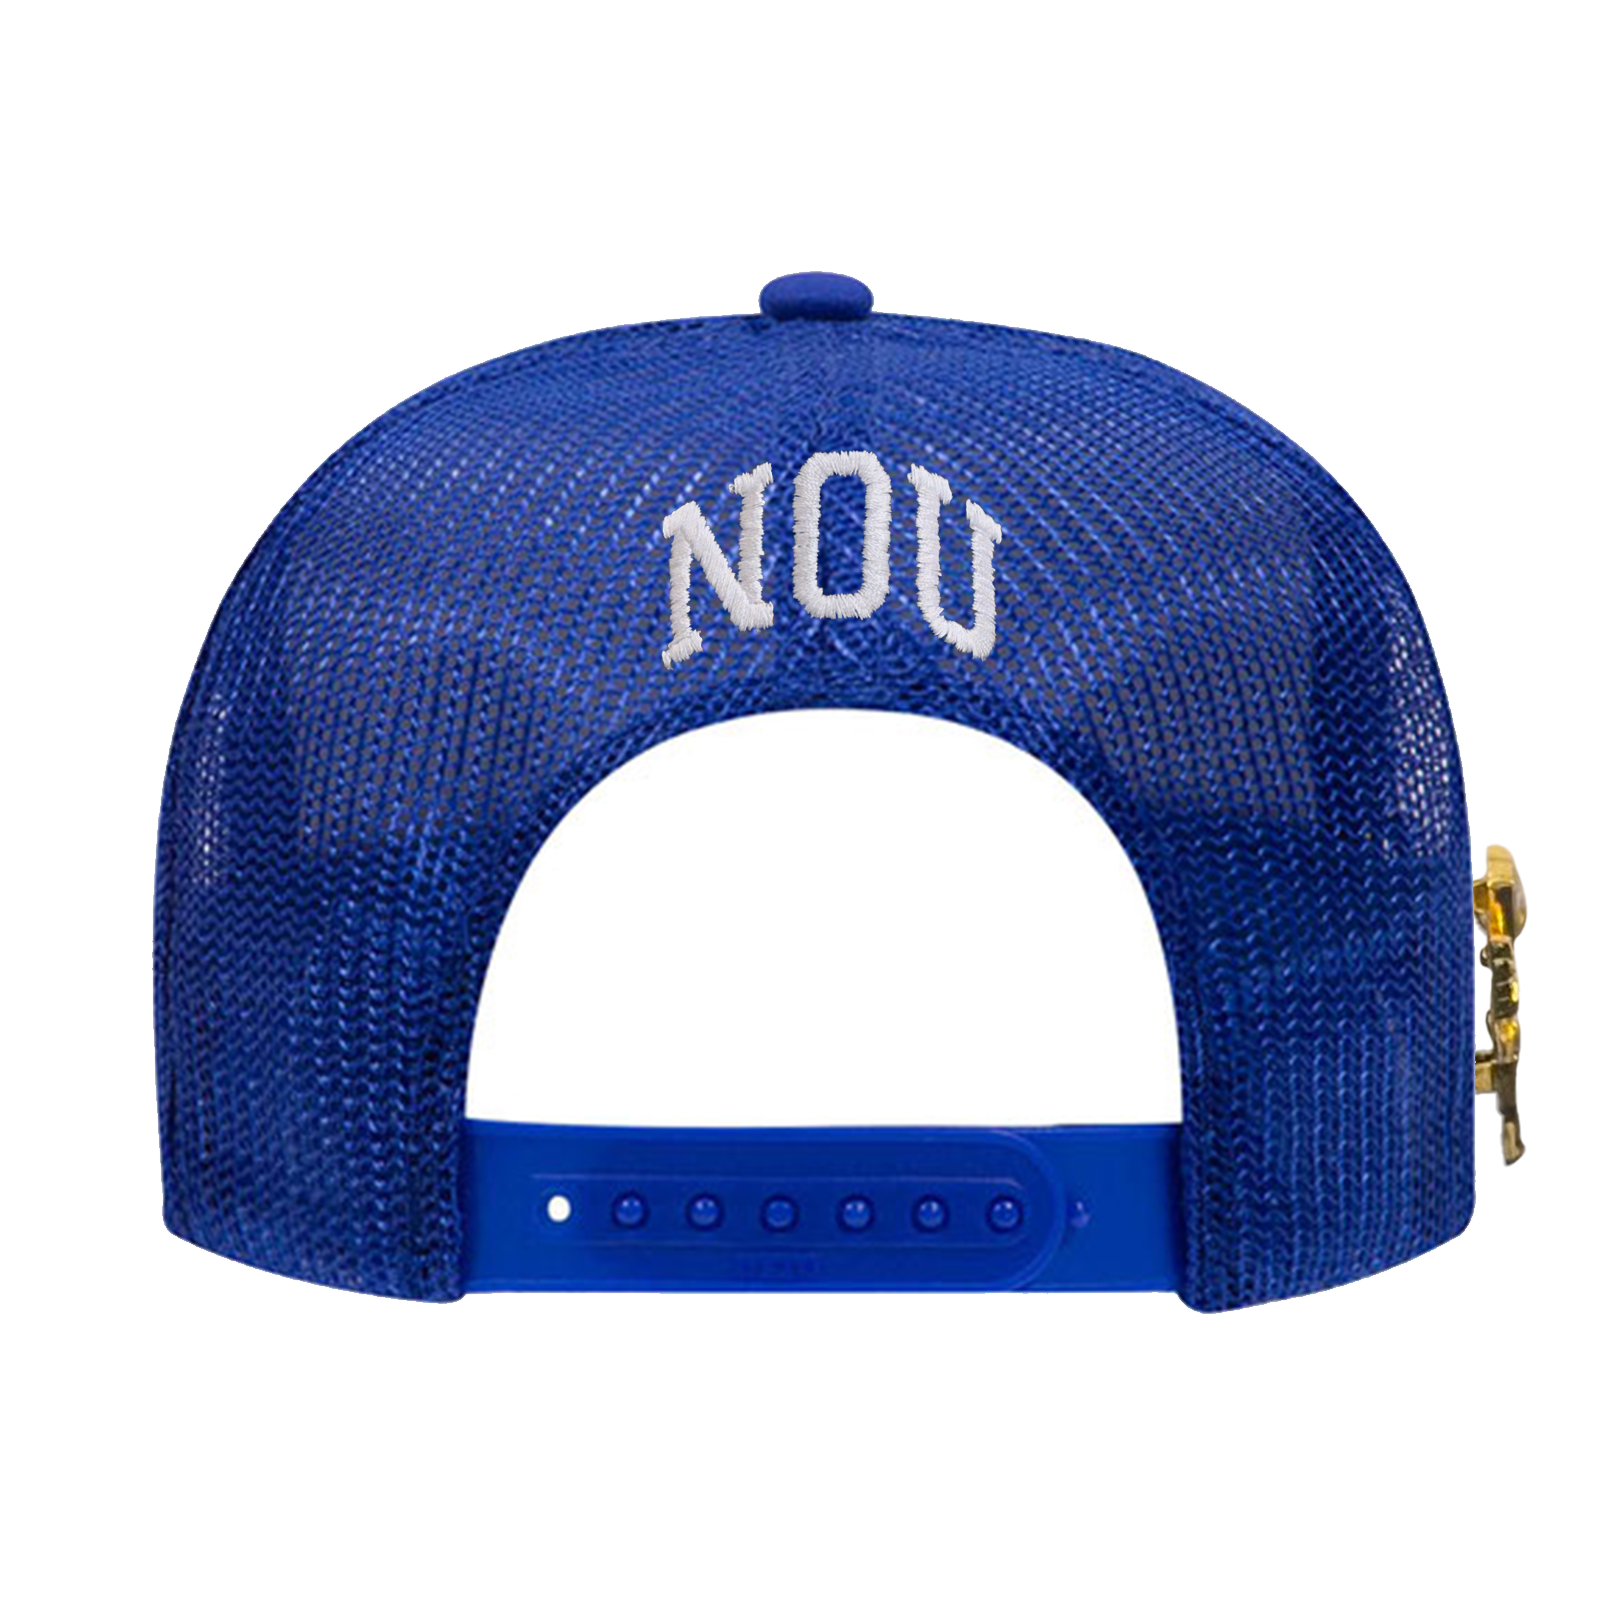 NVNY Blue Snapback with Foreign Angel Pin